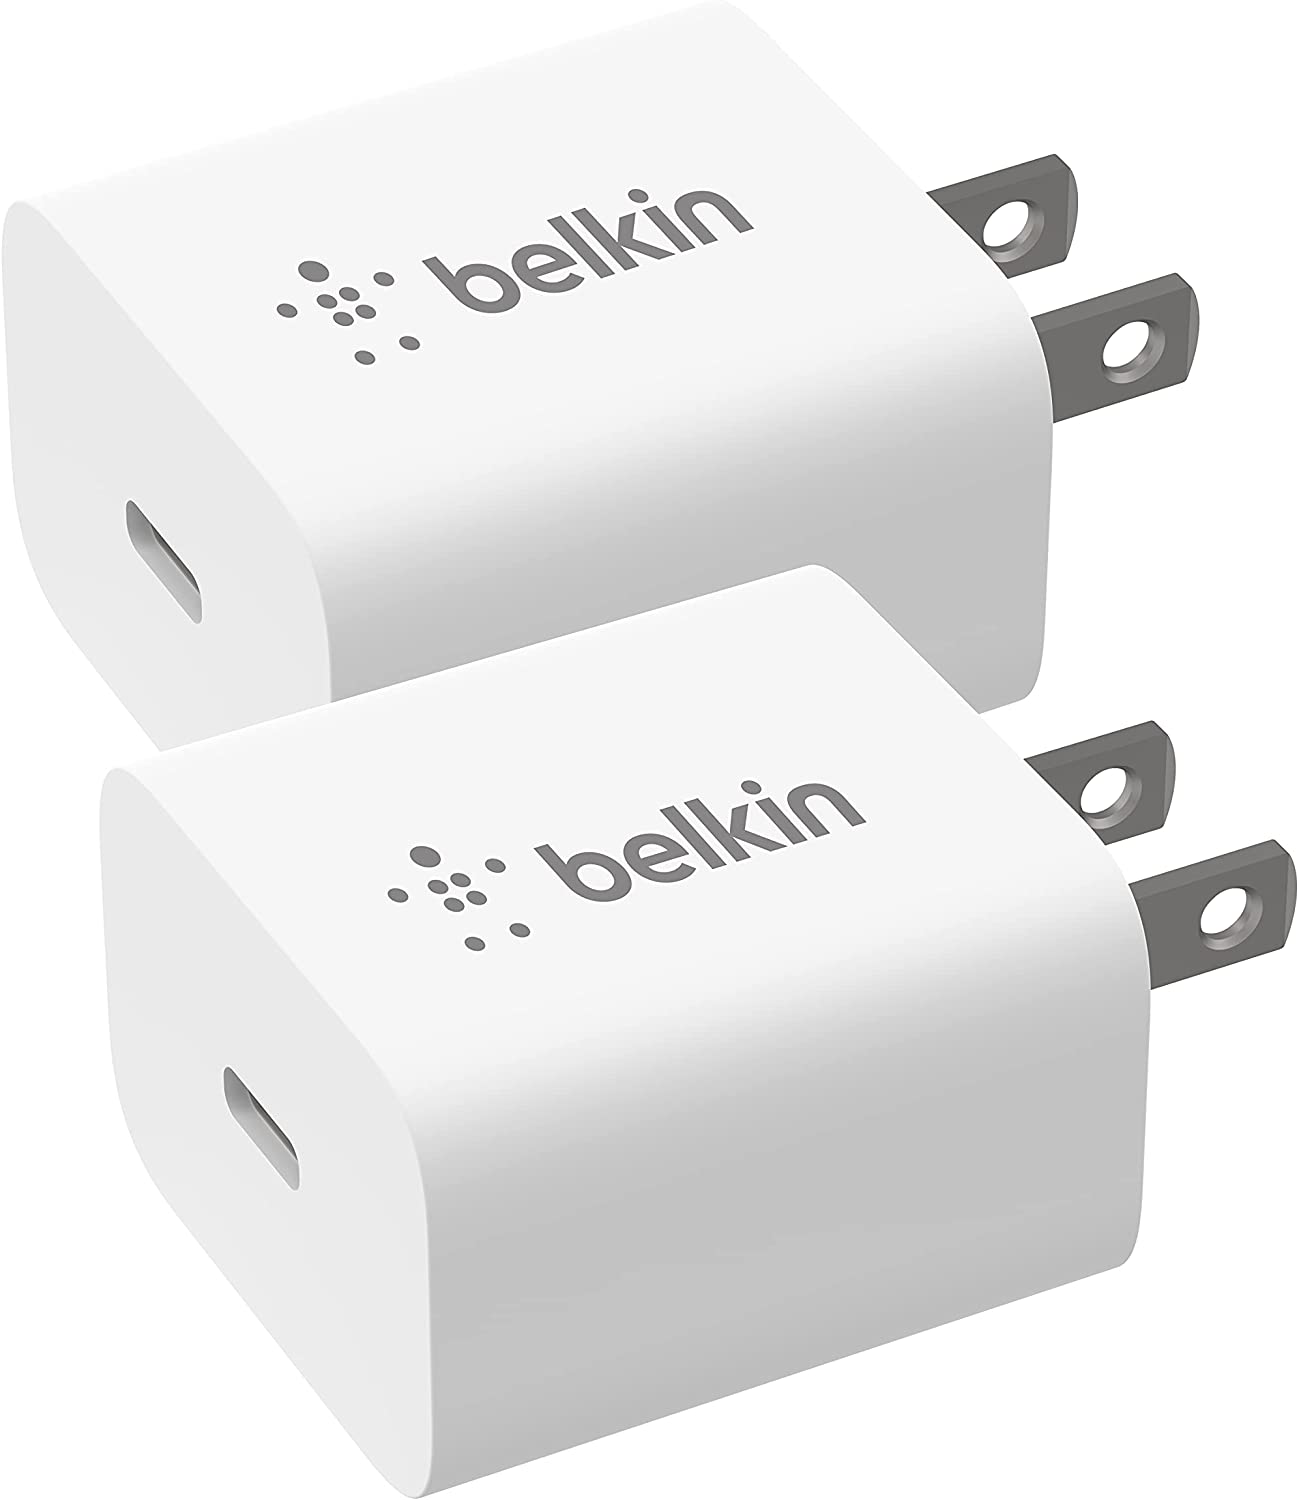 Belkin Iphone13 Wall Charger Render Cropped